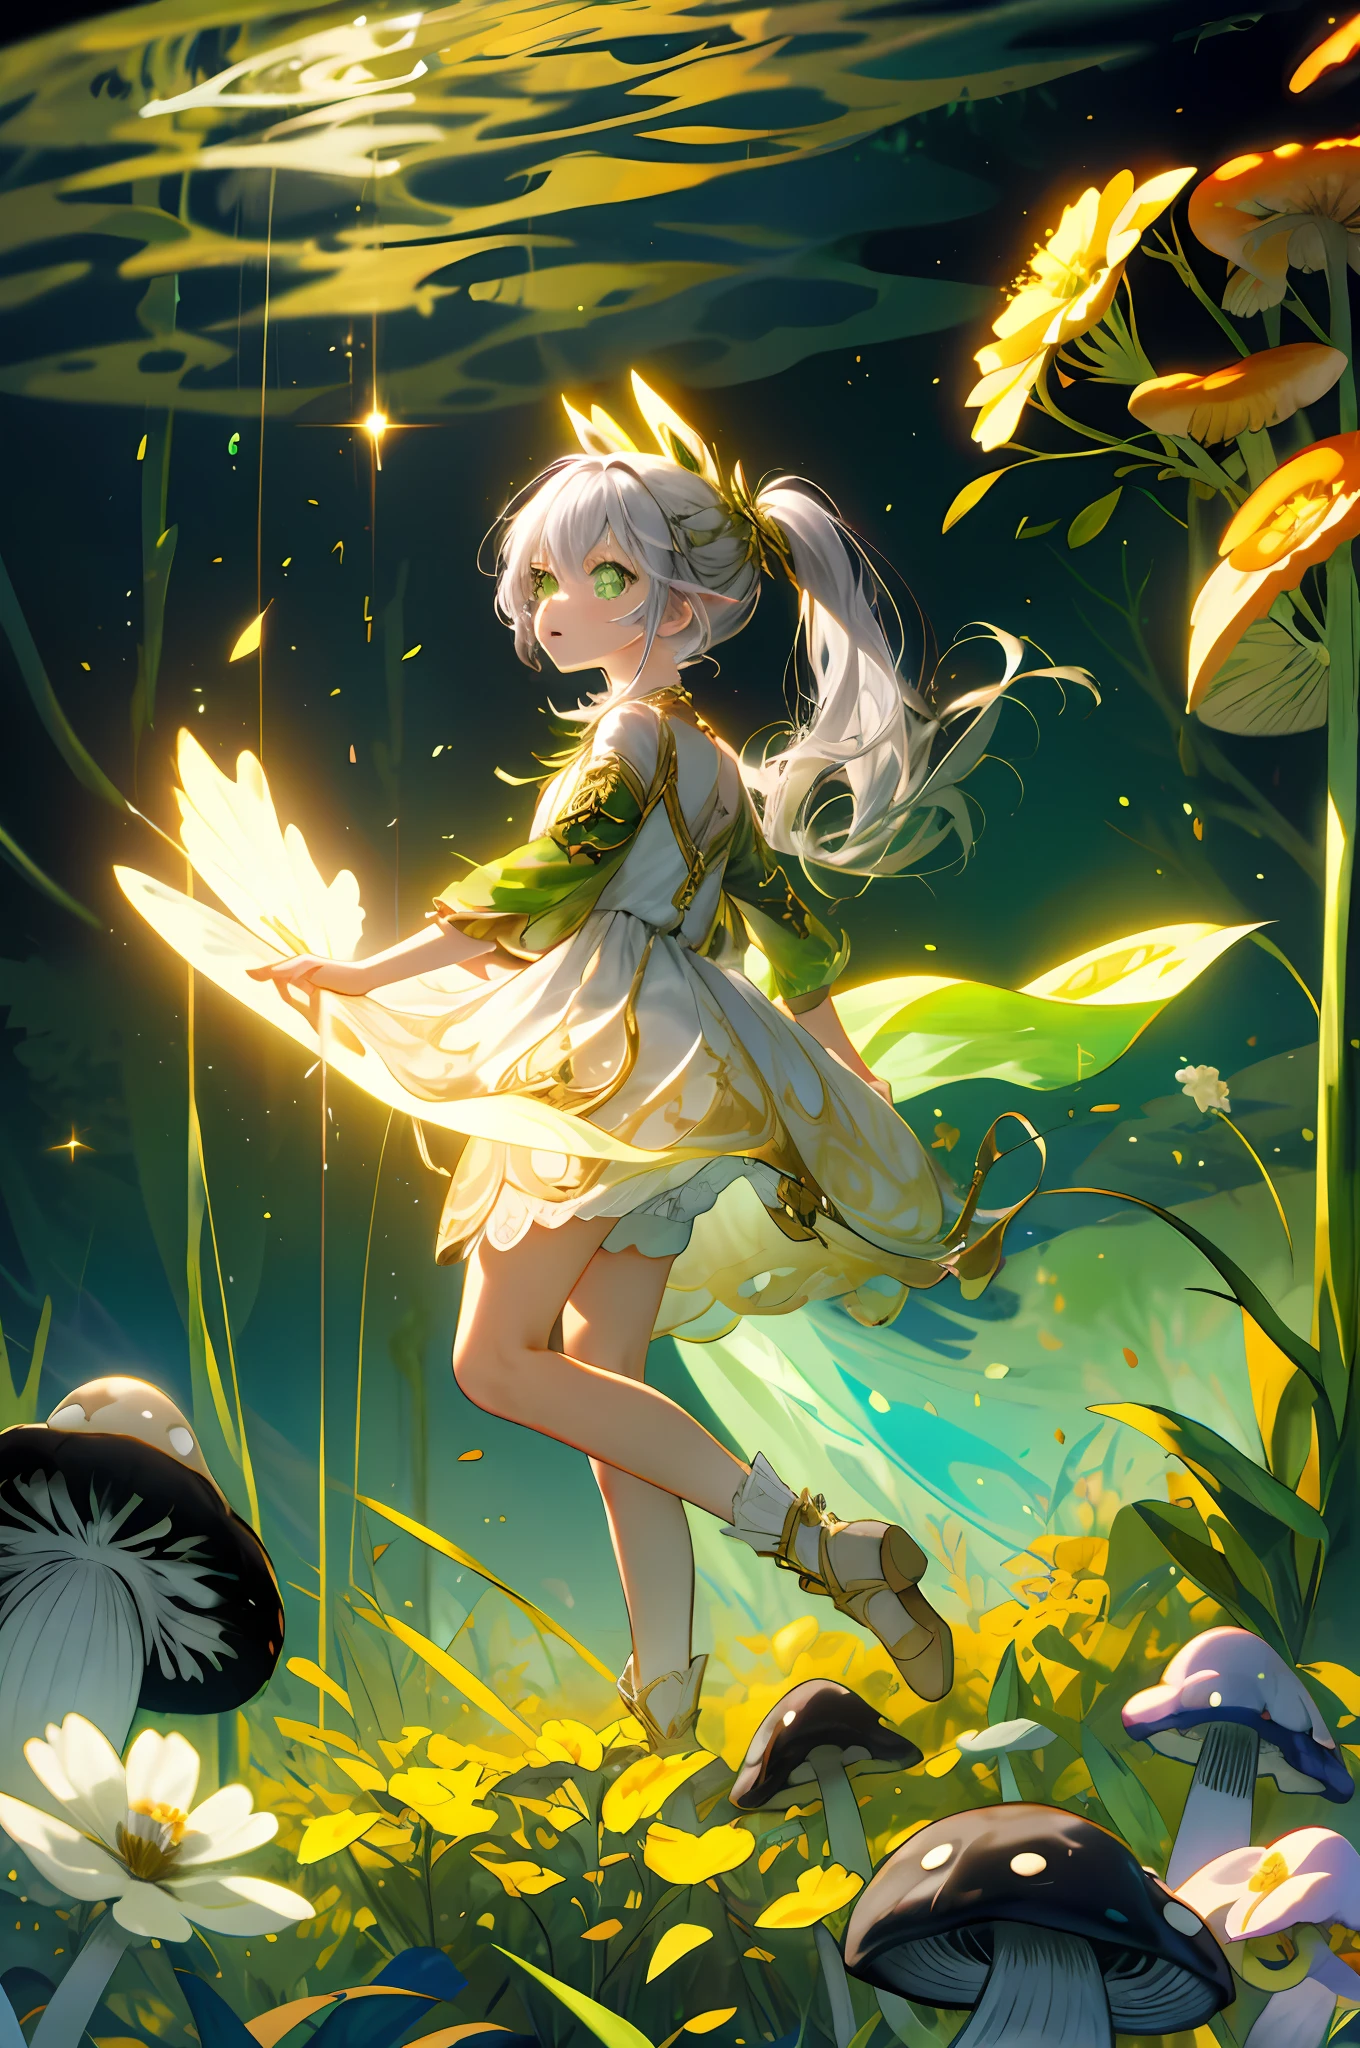 (flat color:0.9),(colorful:1.1),(masterpiece:1,2), best quality, masterpiece, highres, original, extremely detailed wallpaper,1girl,solo, young  girl, long light grey hair, white dress with golden embroidery, green and gold elements, glowing, flowing hair, fullbody, floating in the air in the middle of the forest, magic fantasy forest, glowing flowers and mushrooms, sunny day, sunny light, rays of light, dynamic lighting, cinematic shot